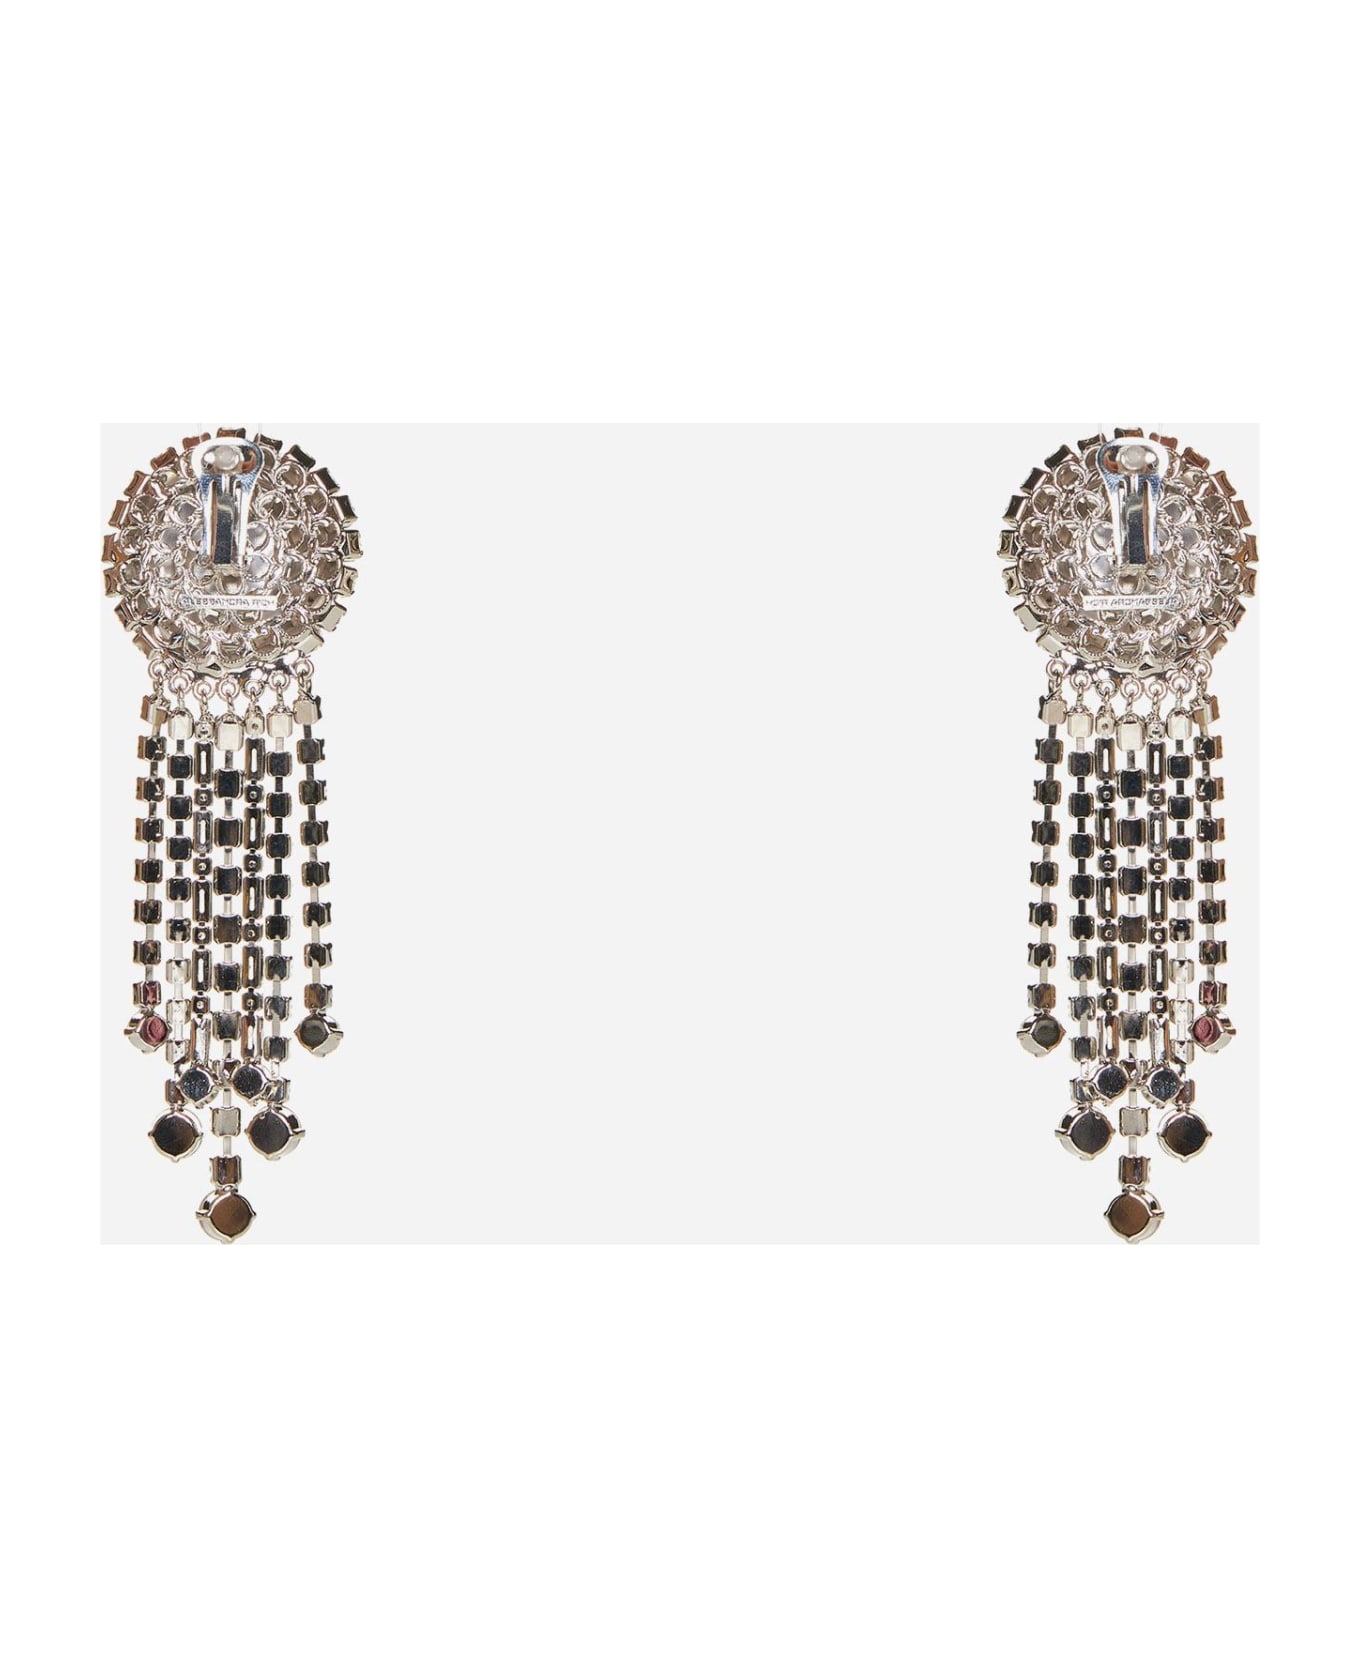 Alessandra Rich Crystal Fringed Round Earrings - SILVER